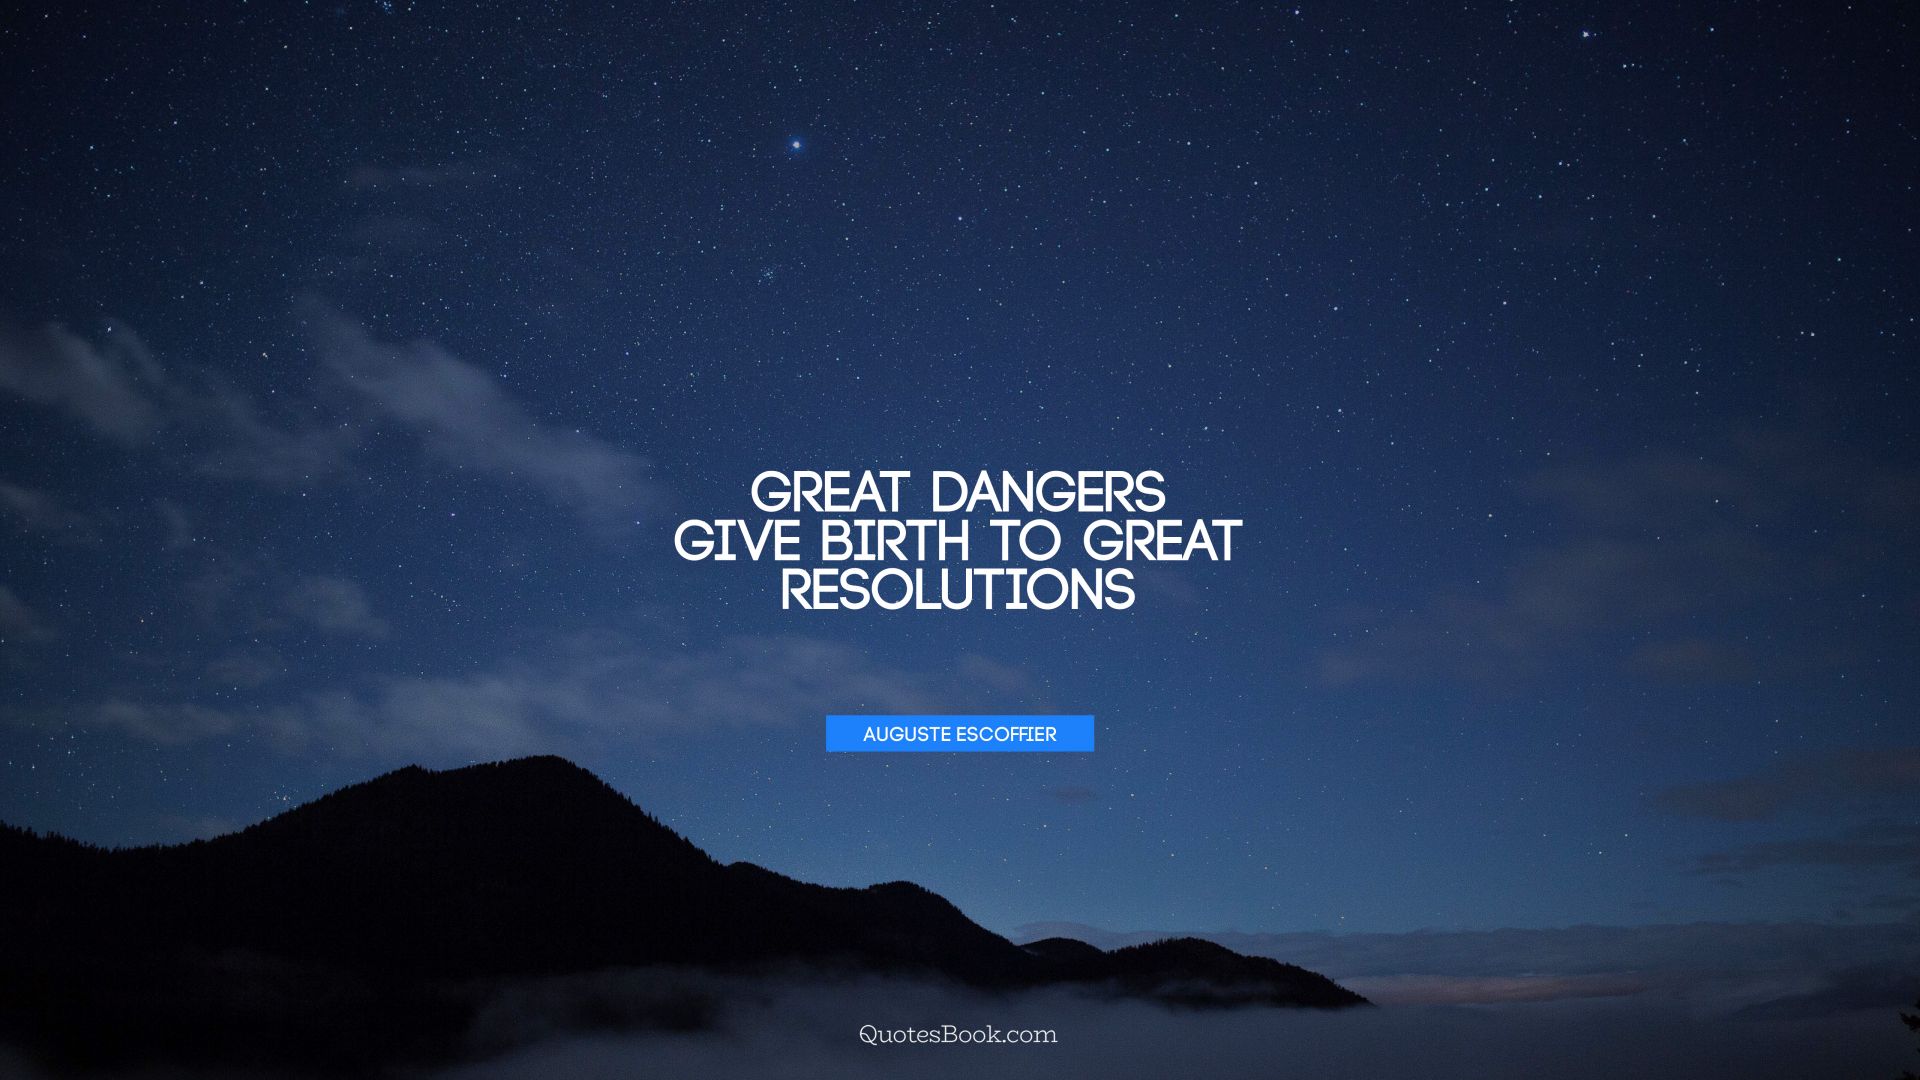 Great dangers give birth to great resolutions. - Quote by Auguste Escoffier